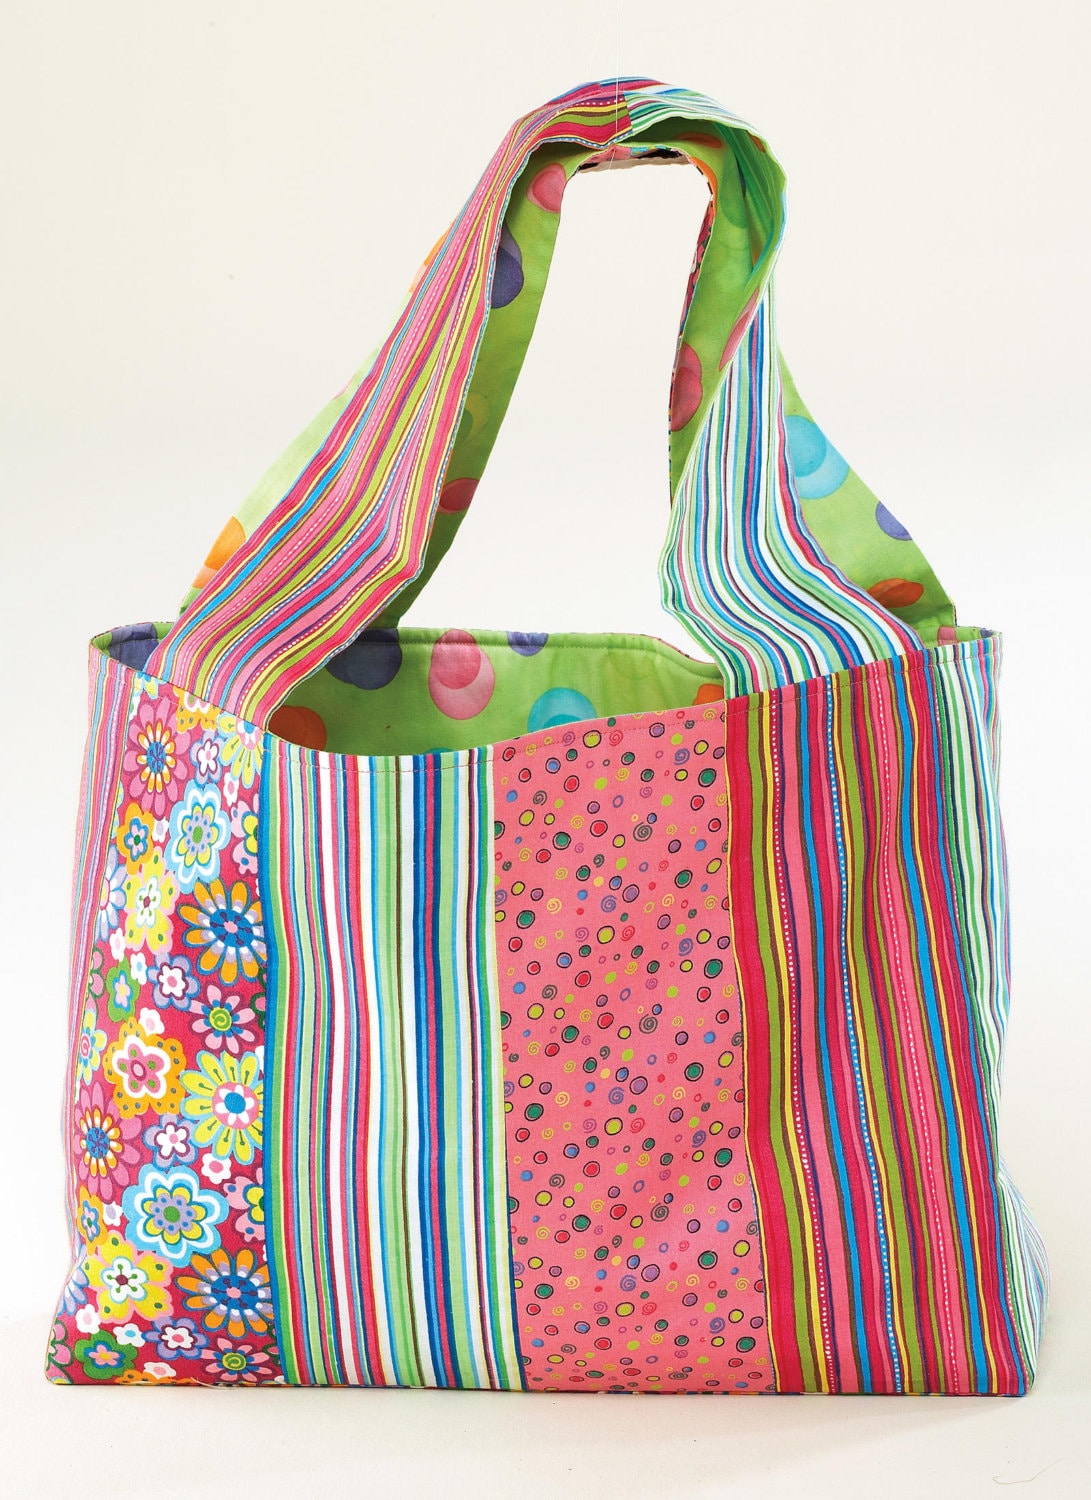 Kwik Sew 3612 Tote Bags in Three Styles, Sewing Pattern for reusable shopping bags, Go Green ...